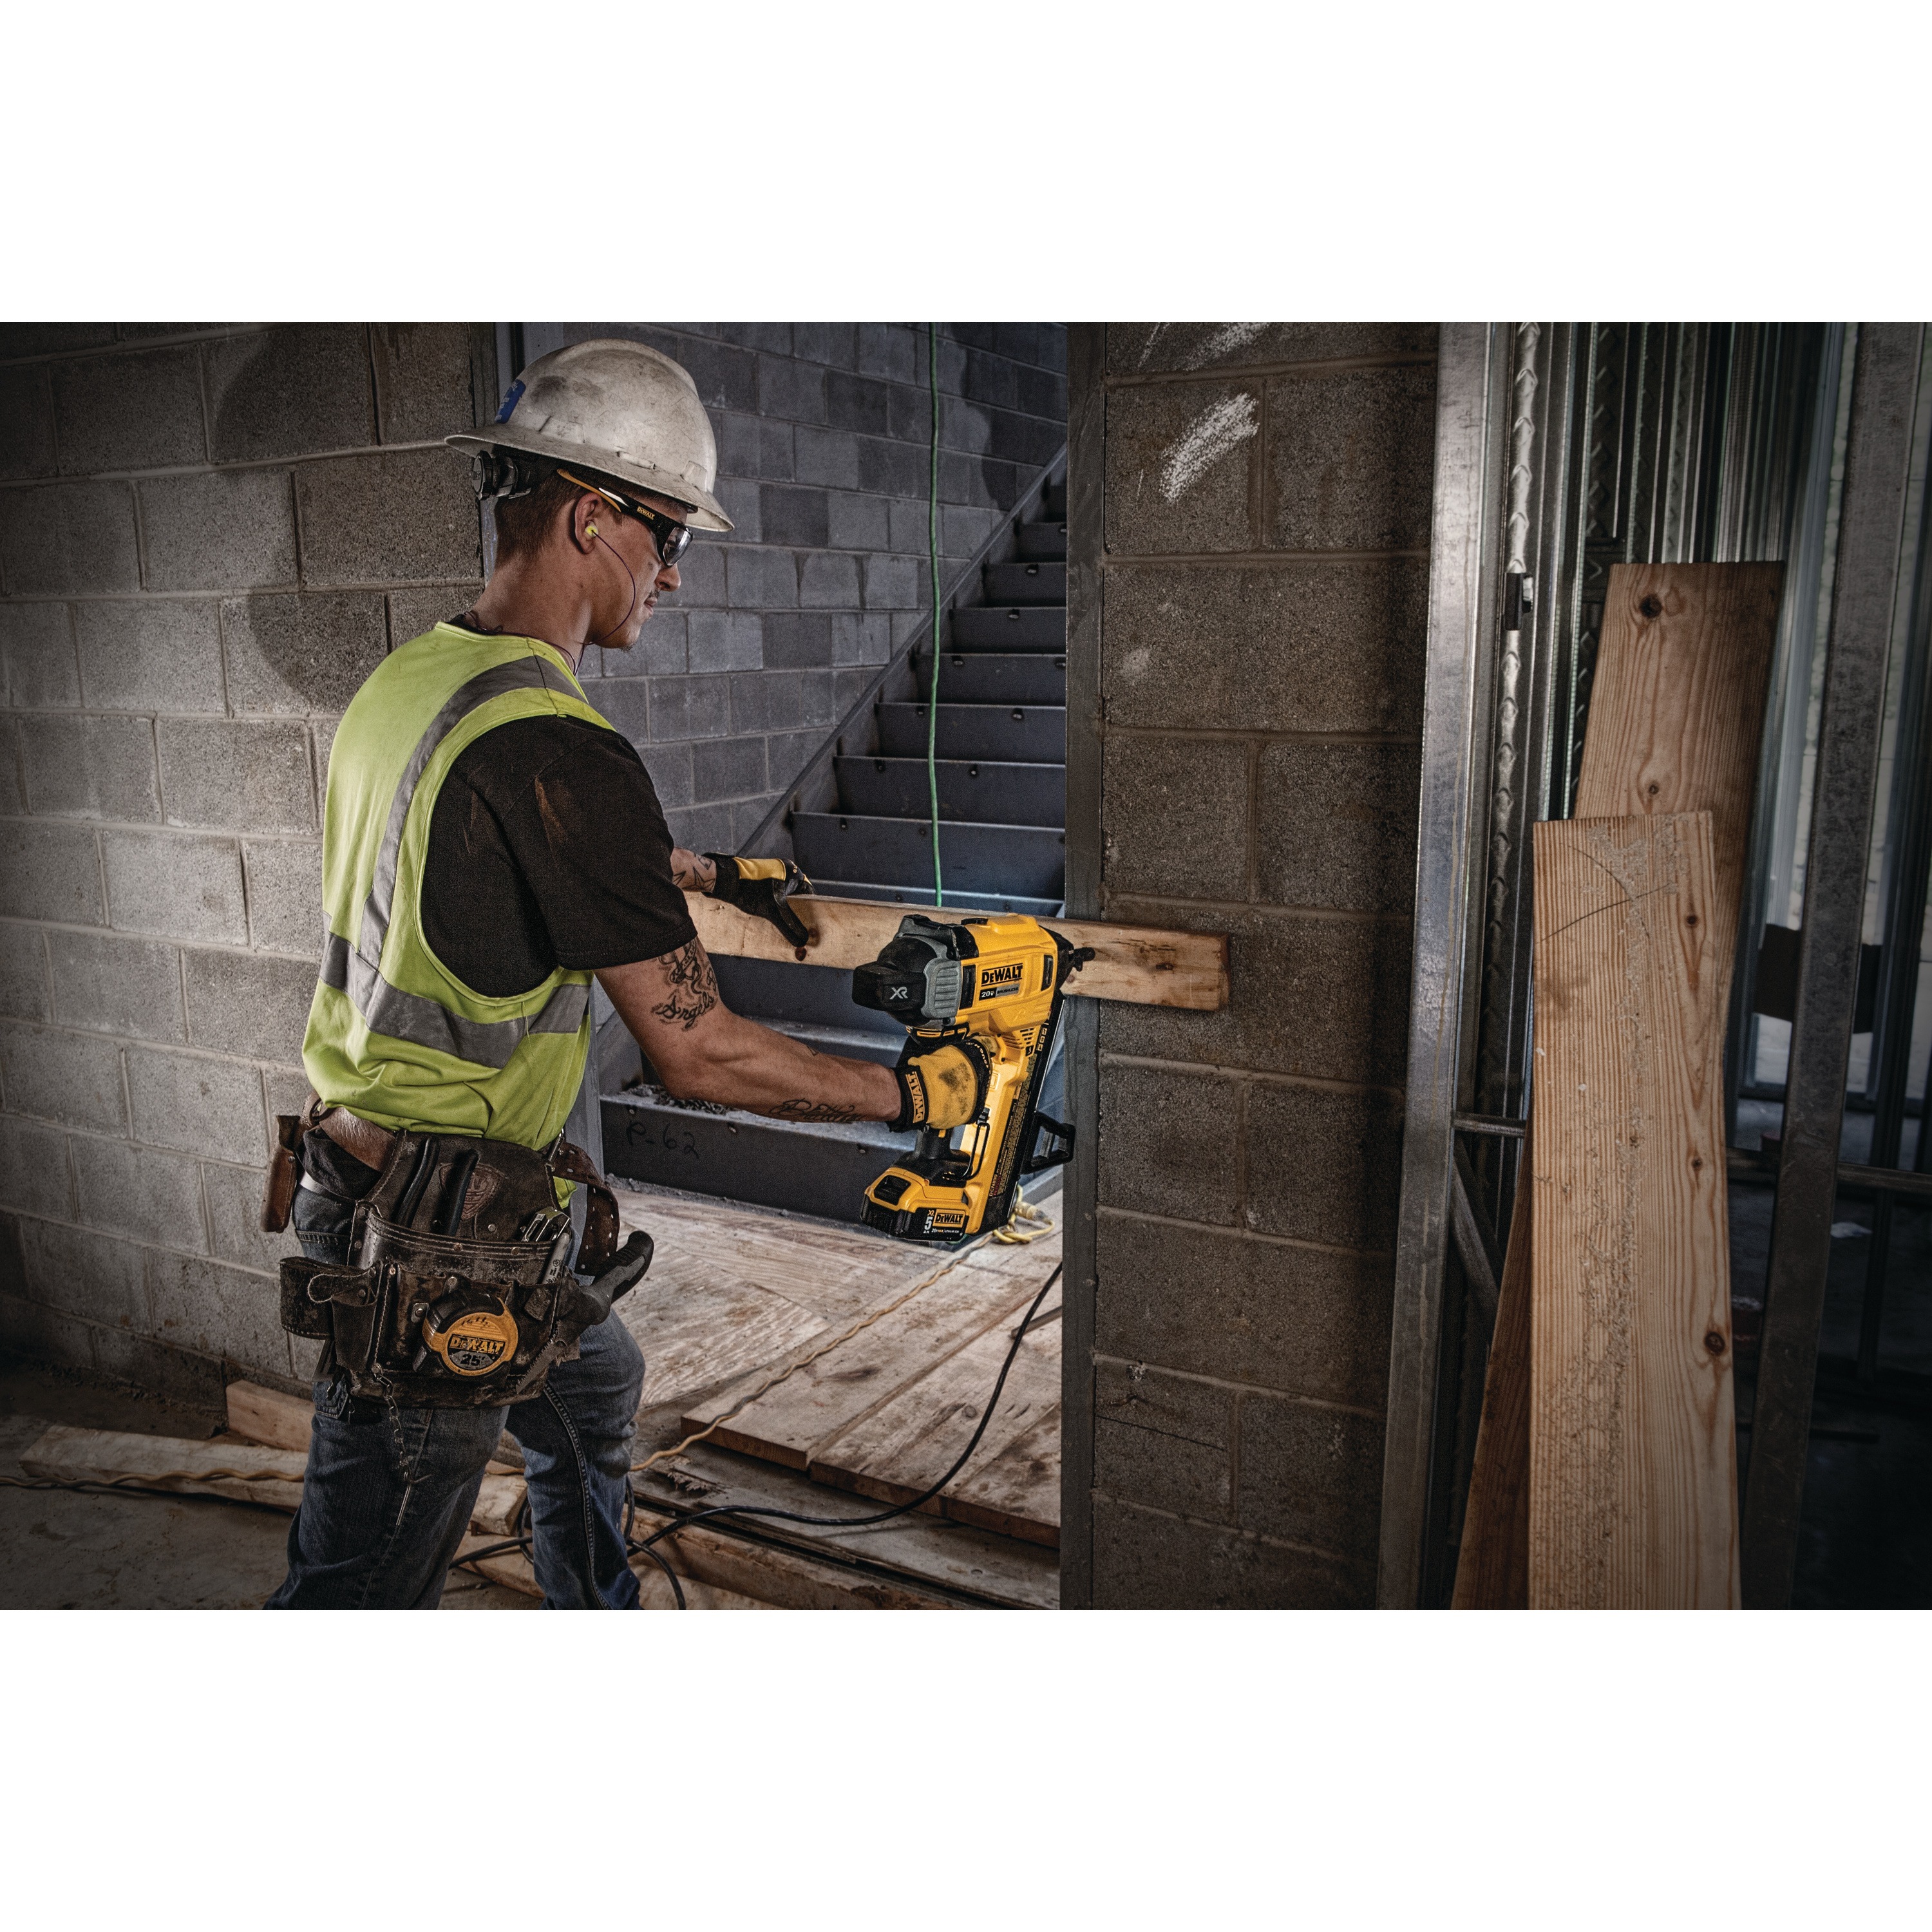 Cordless Concrete Nailer being used by a person to fasten nails into wooden plank.